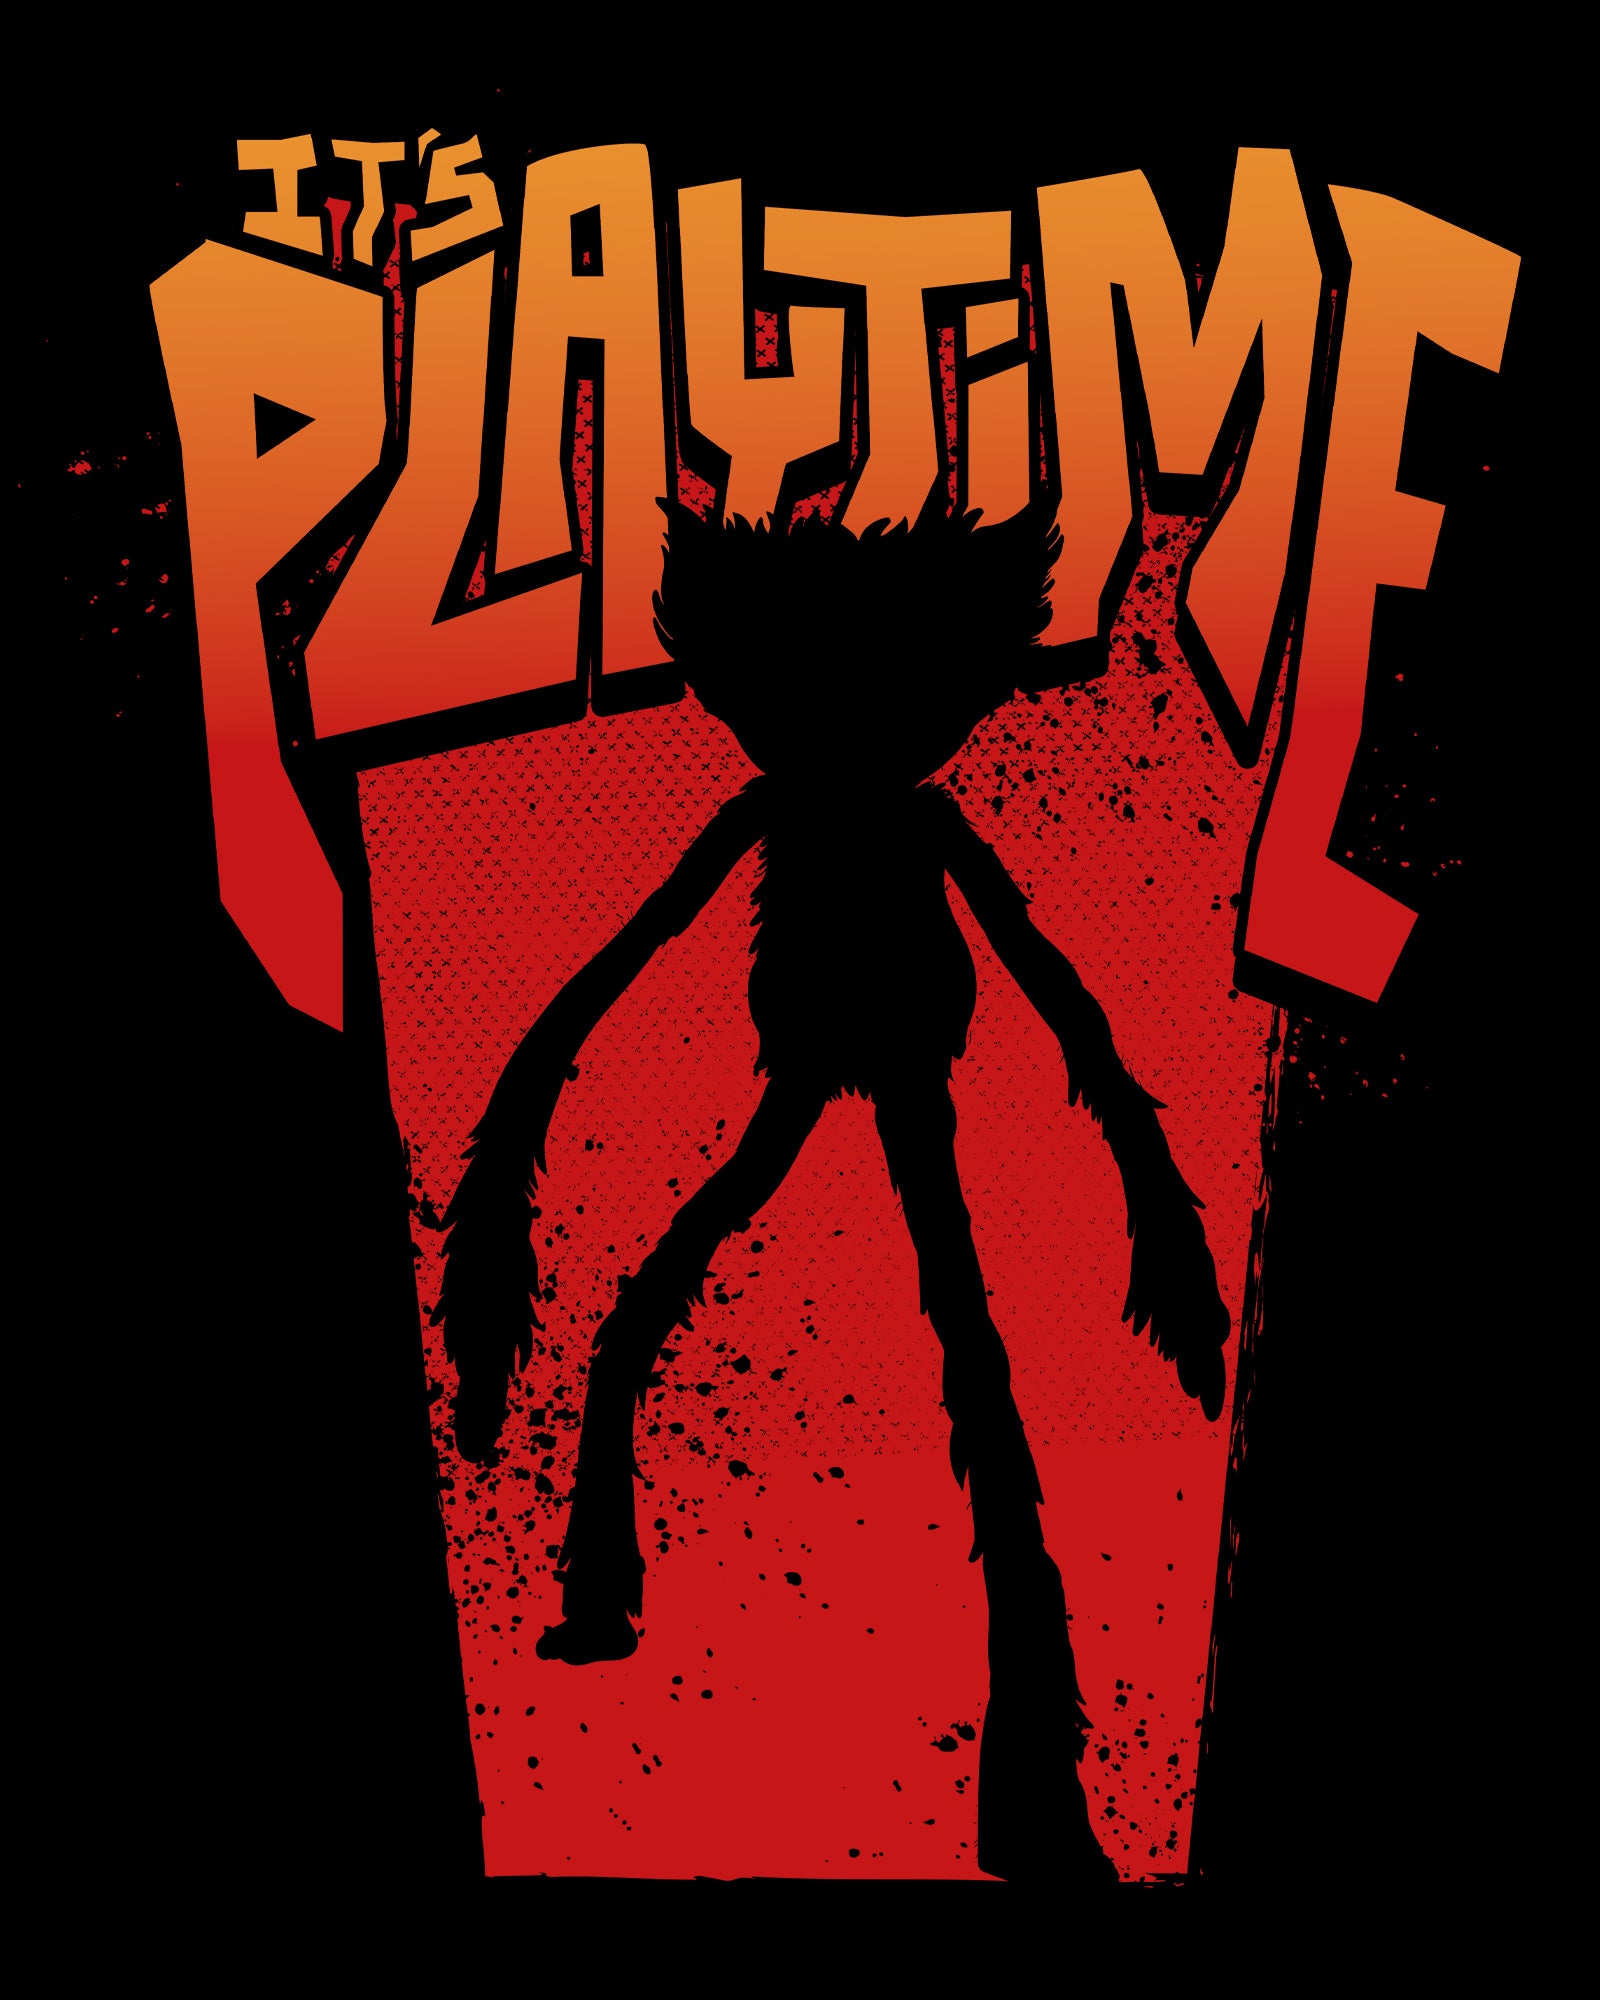 image on shirt: huggy wuggy silhouetted. text: it's playtime  